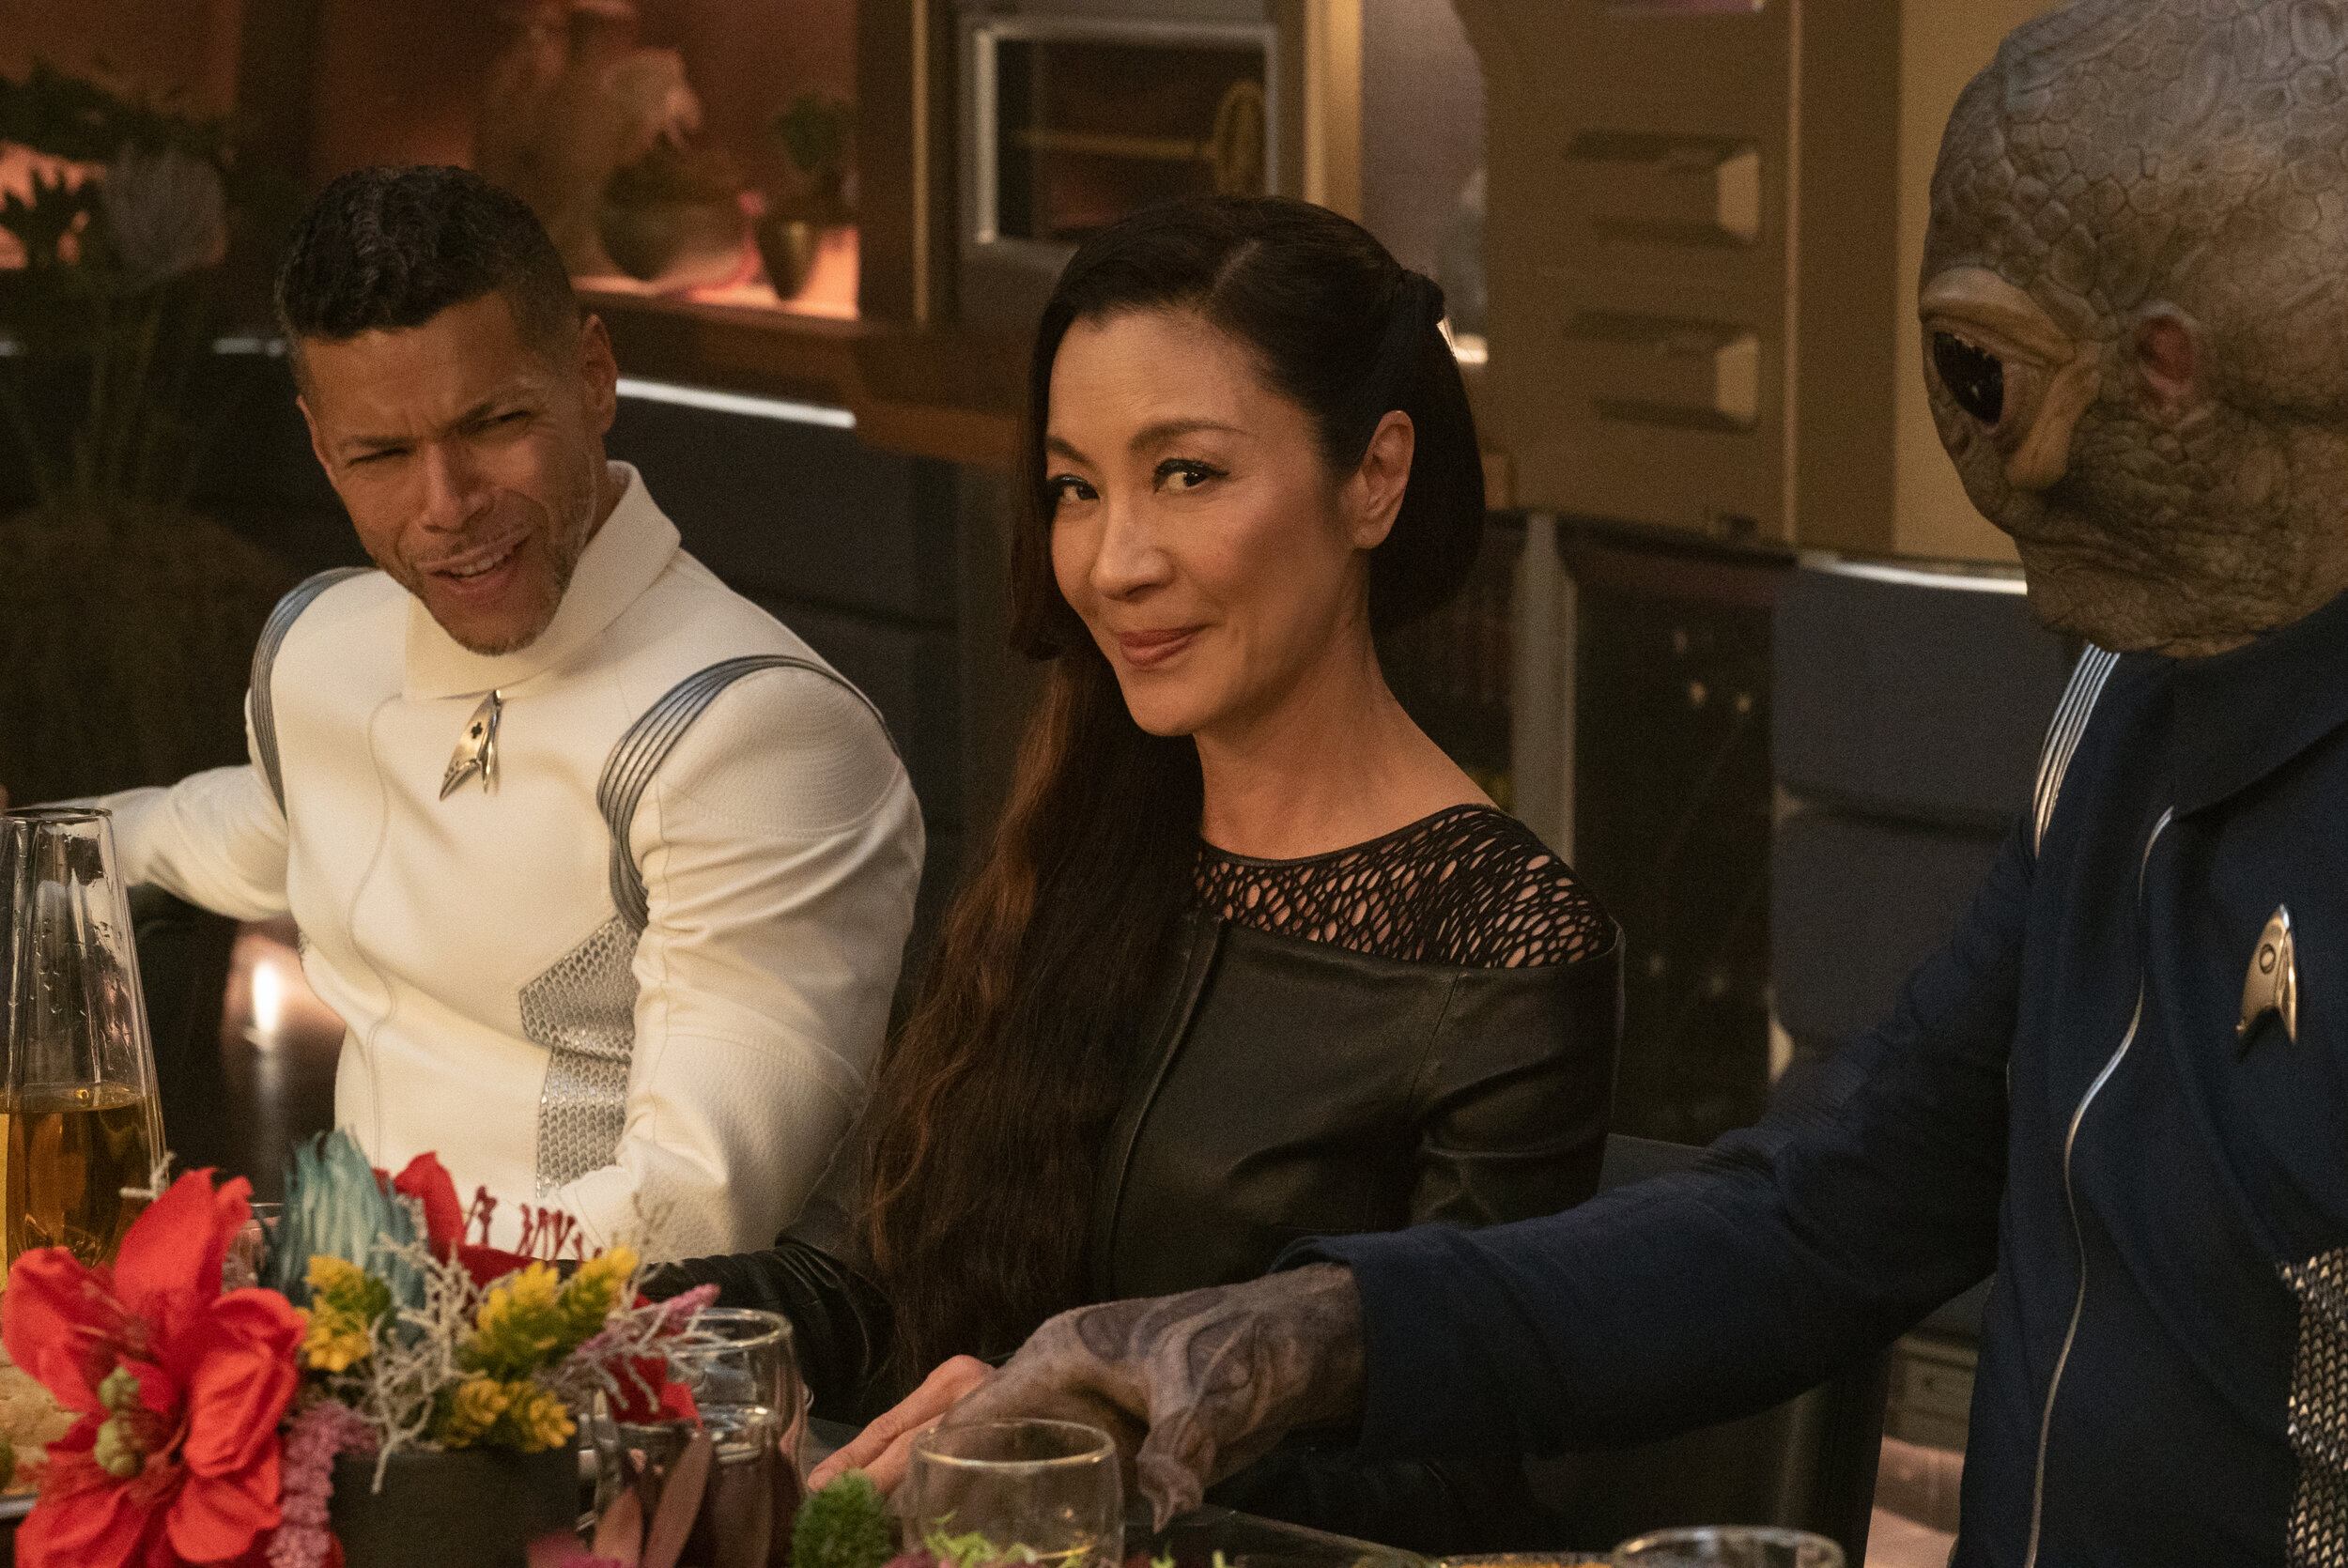   "Forget Me Not" -- Ep#304 -- Pictured: Wilson Cruz as Dr. Hugh Culber, Michelle Yeoh as Georgiou and David Ben Tomlinson as Linus of the CBS All Access series STAR TREK: DISCOVERY. Photo Cr: Michael Gibson/CBS ©2020 CBS Interactive, Inc. All Rights